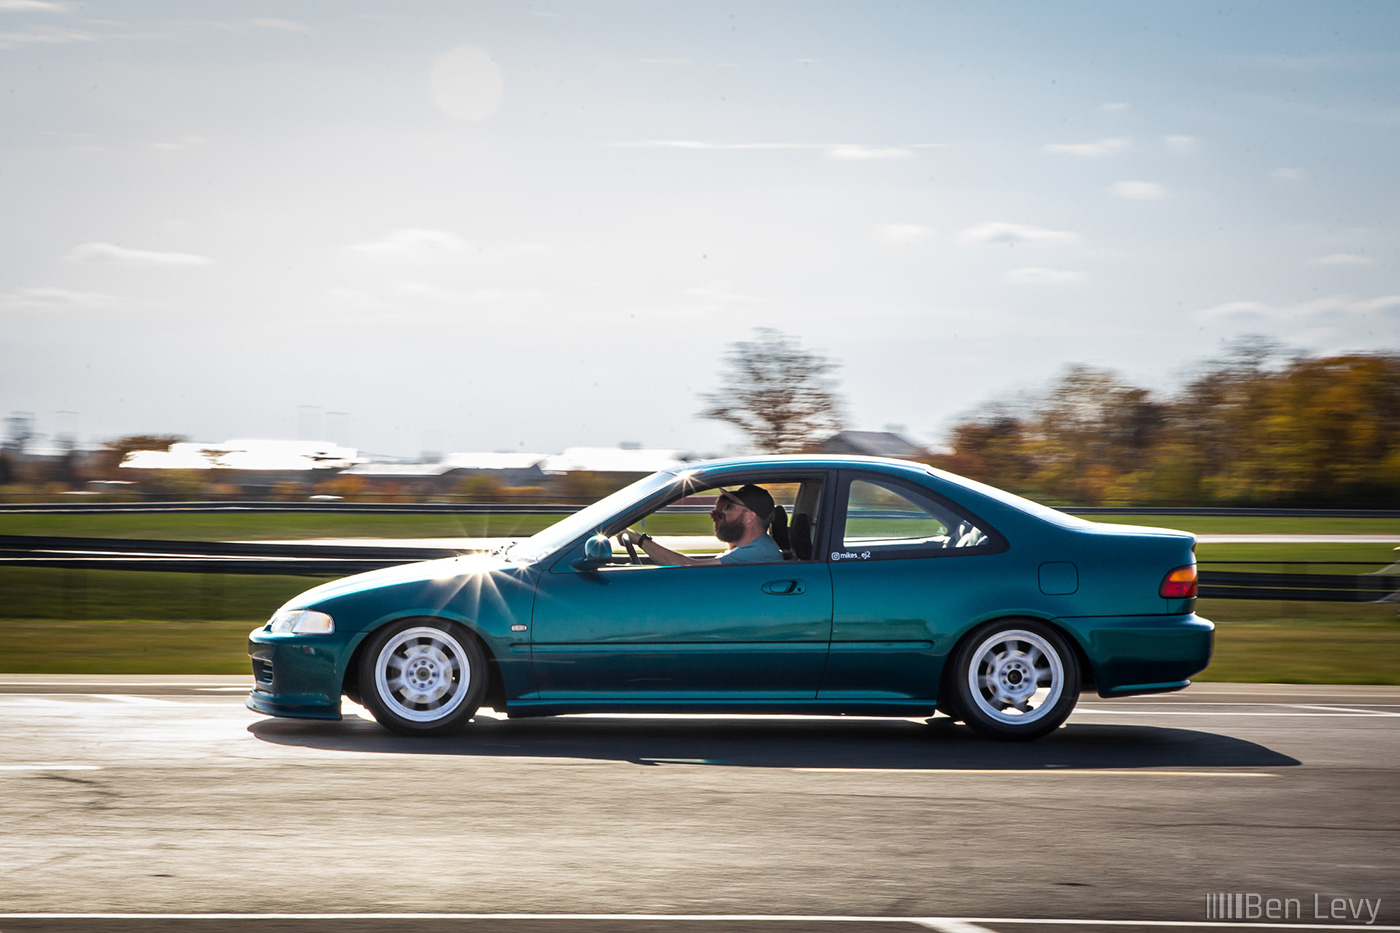 Rolling Shot of Teal Honda Civic Coupe